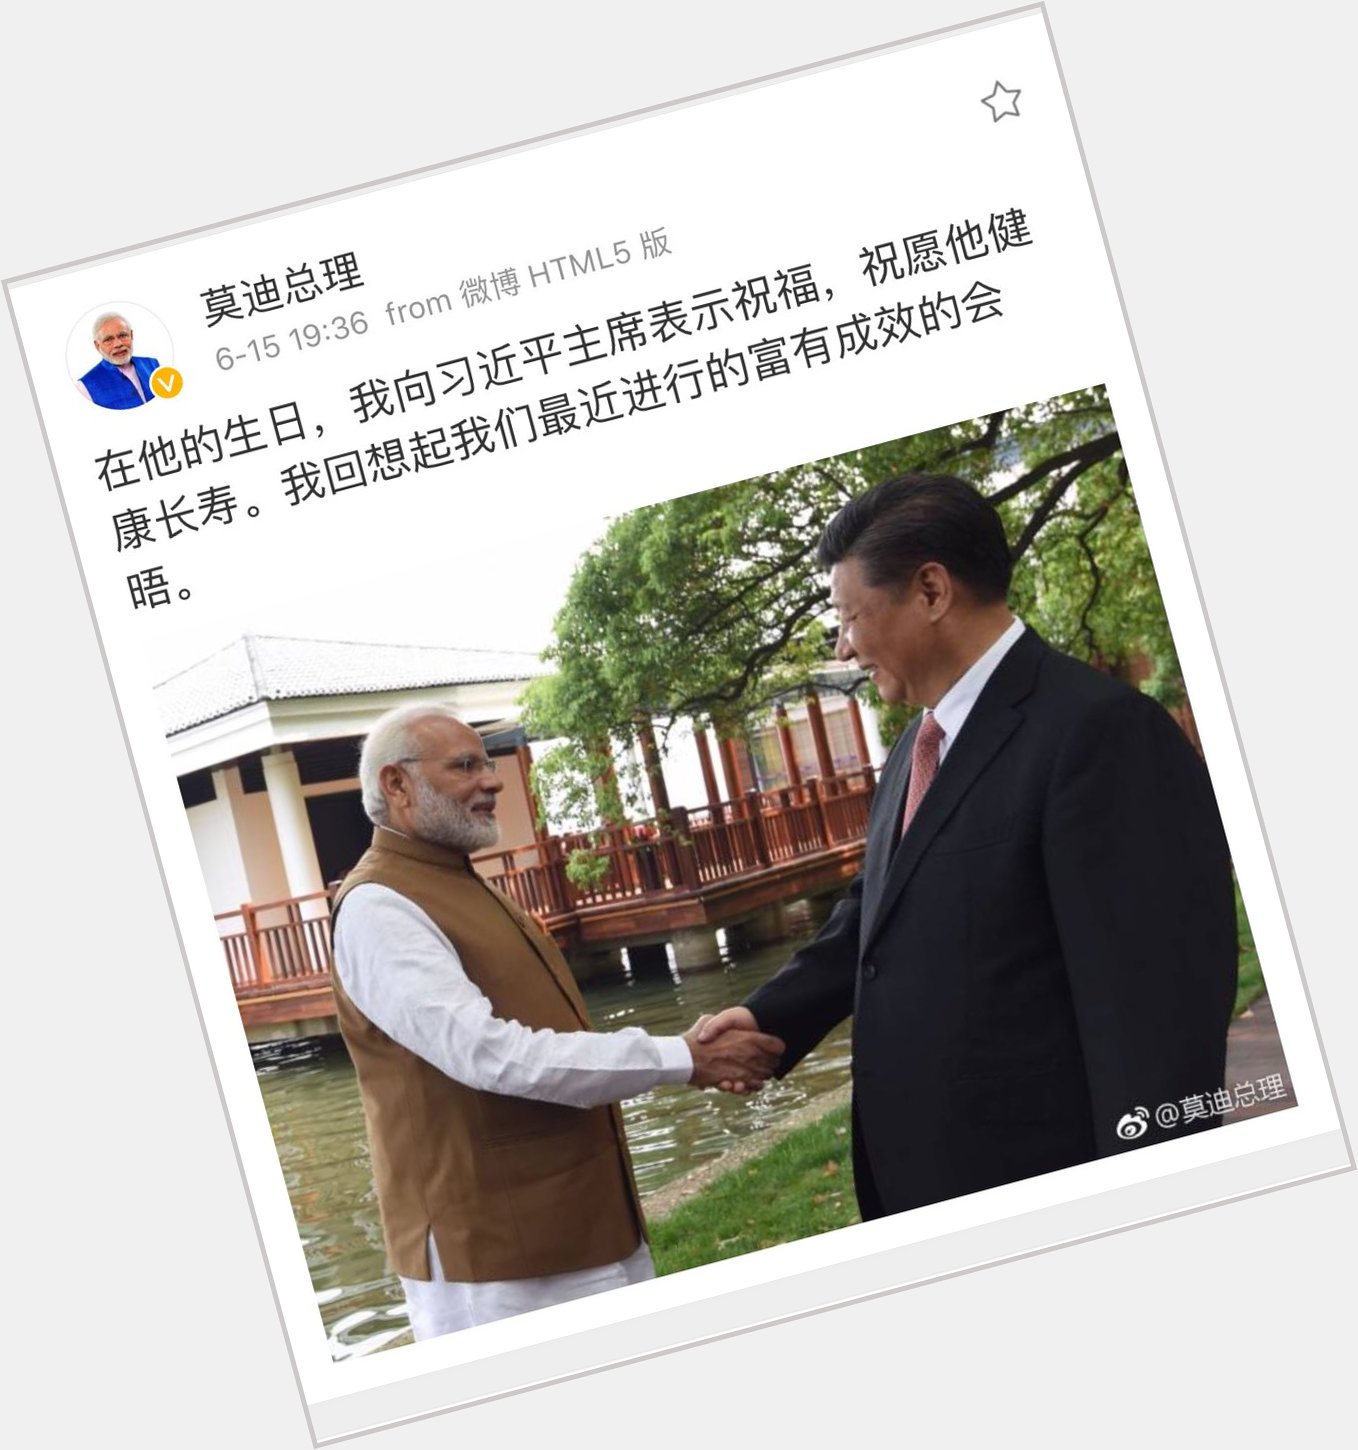 Modi wishes Xi Jinping a happy birthday and a long & healthy life in a Weibo message today 